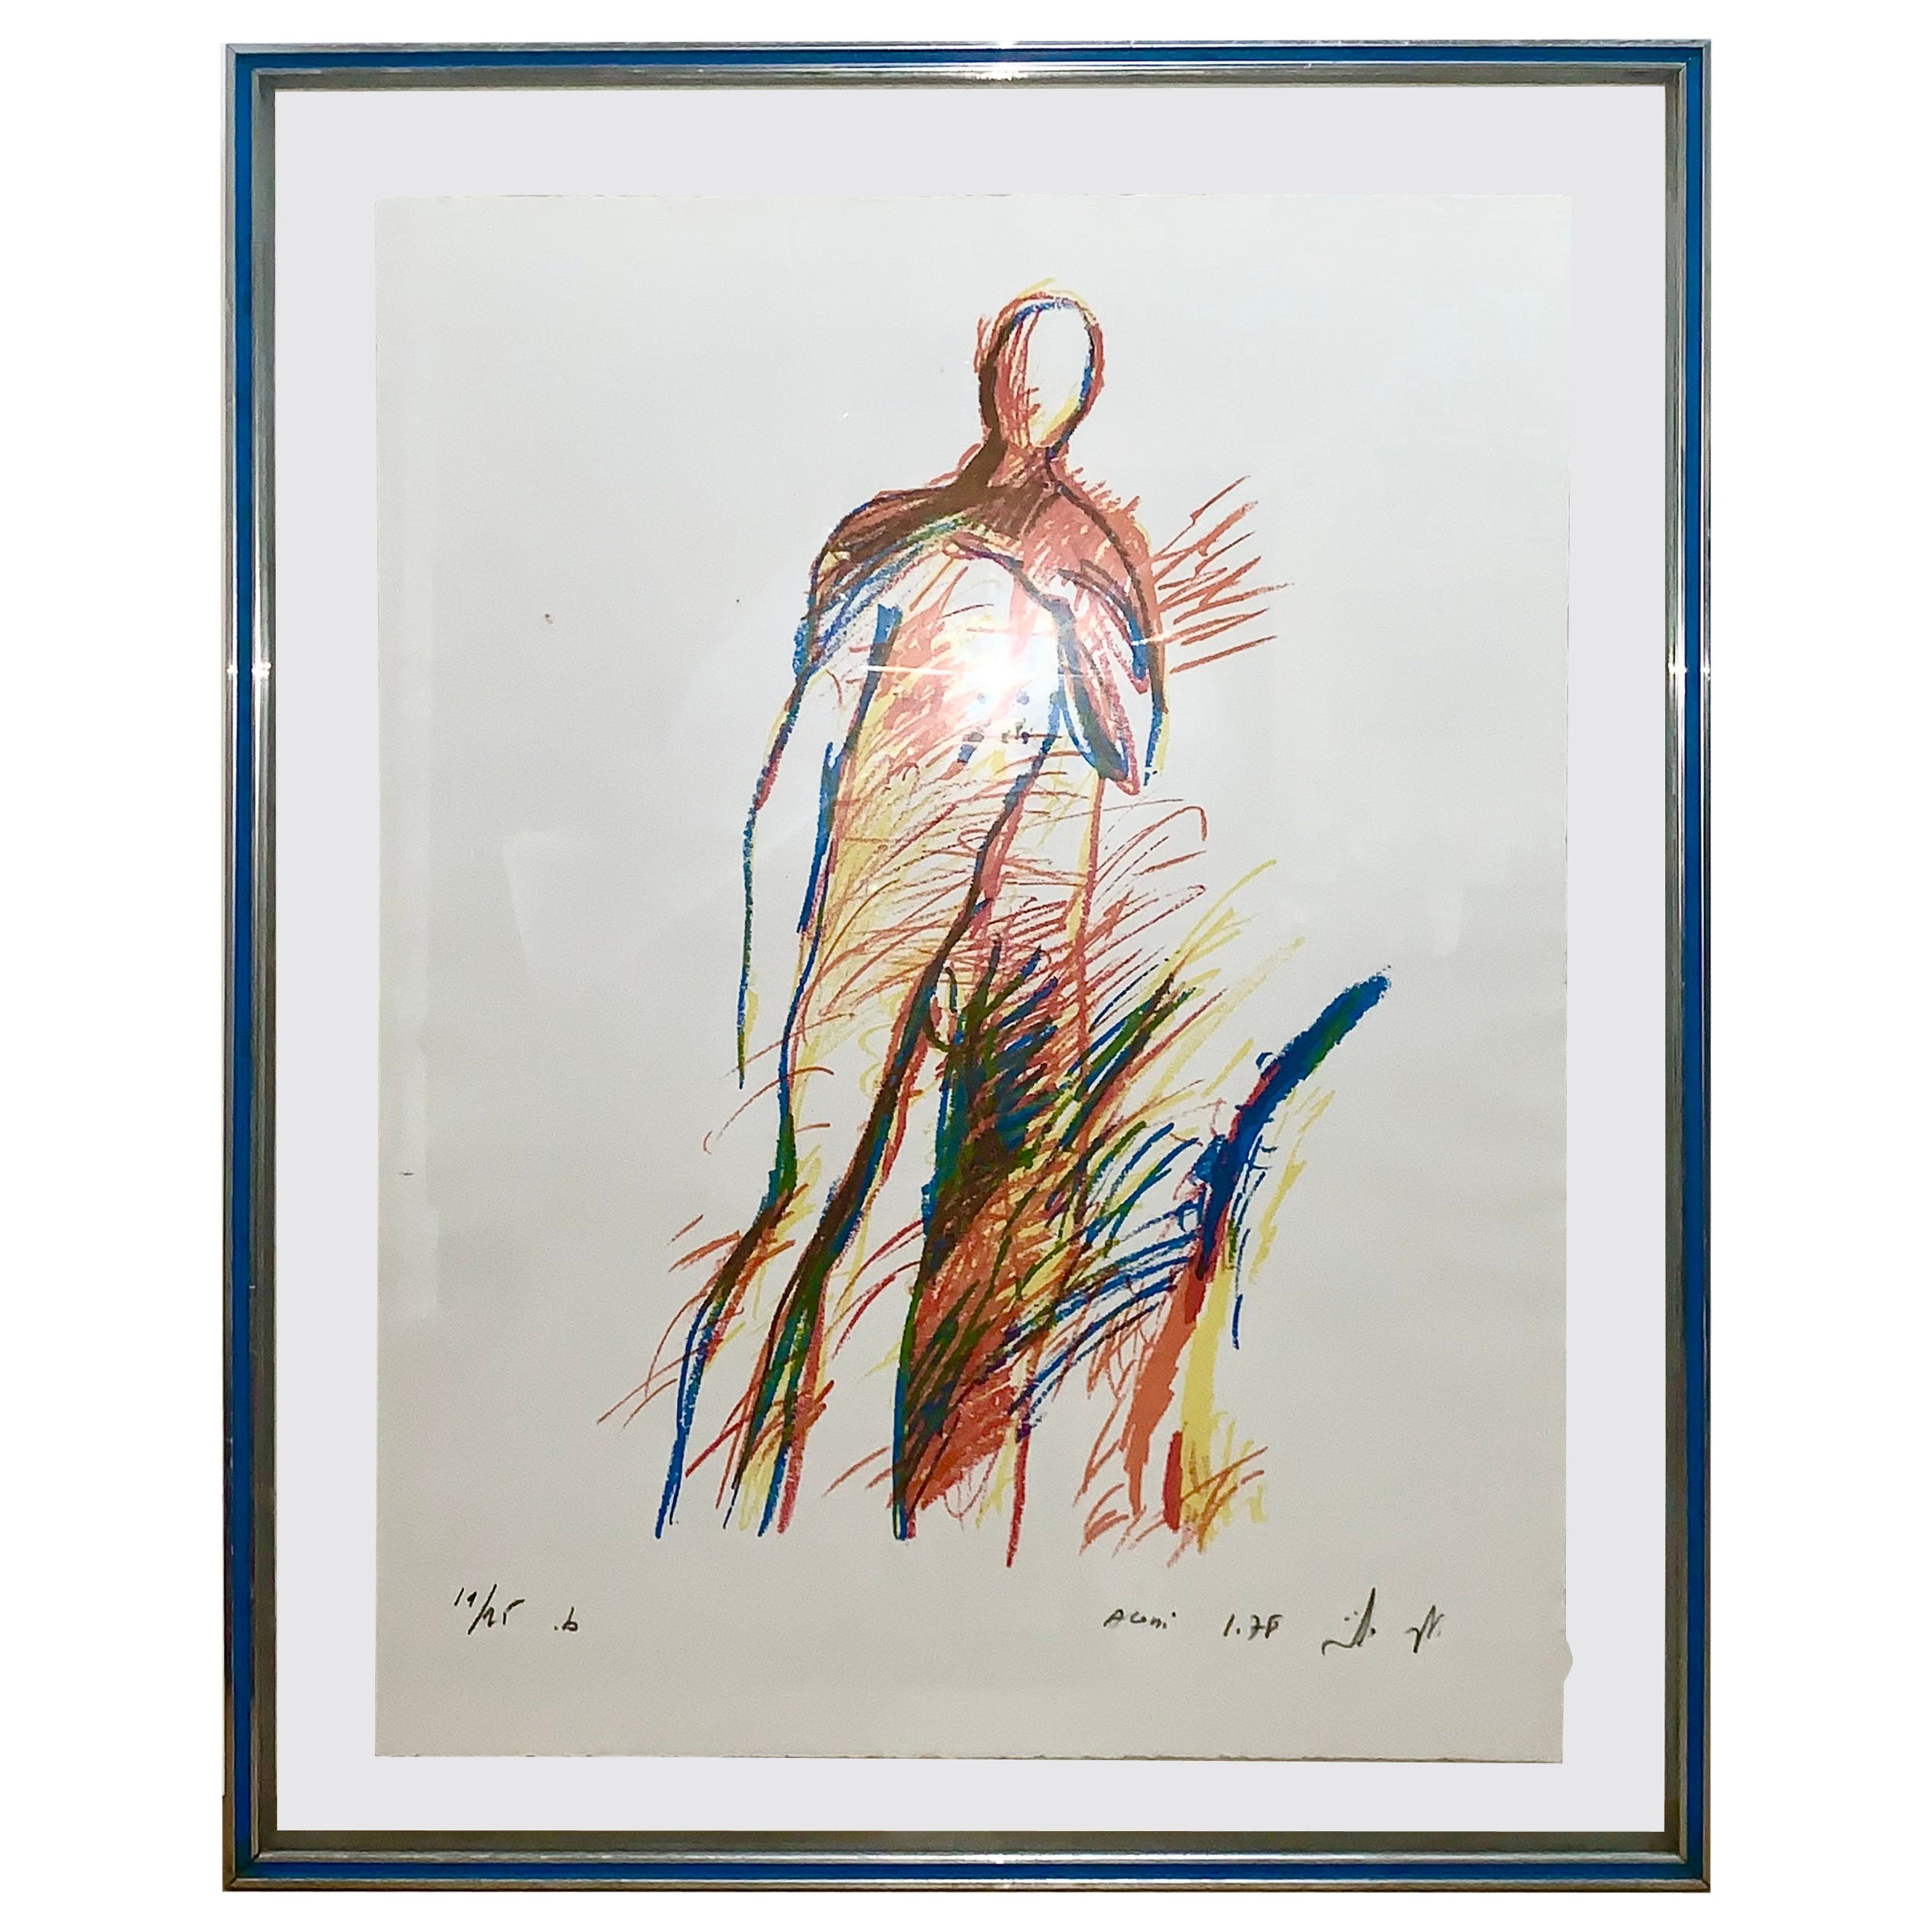 Vintage Lithographic Print Framed, Signed by Artist, 1978